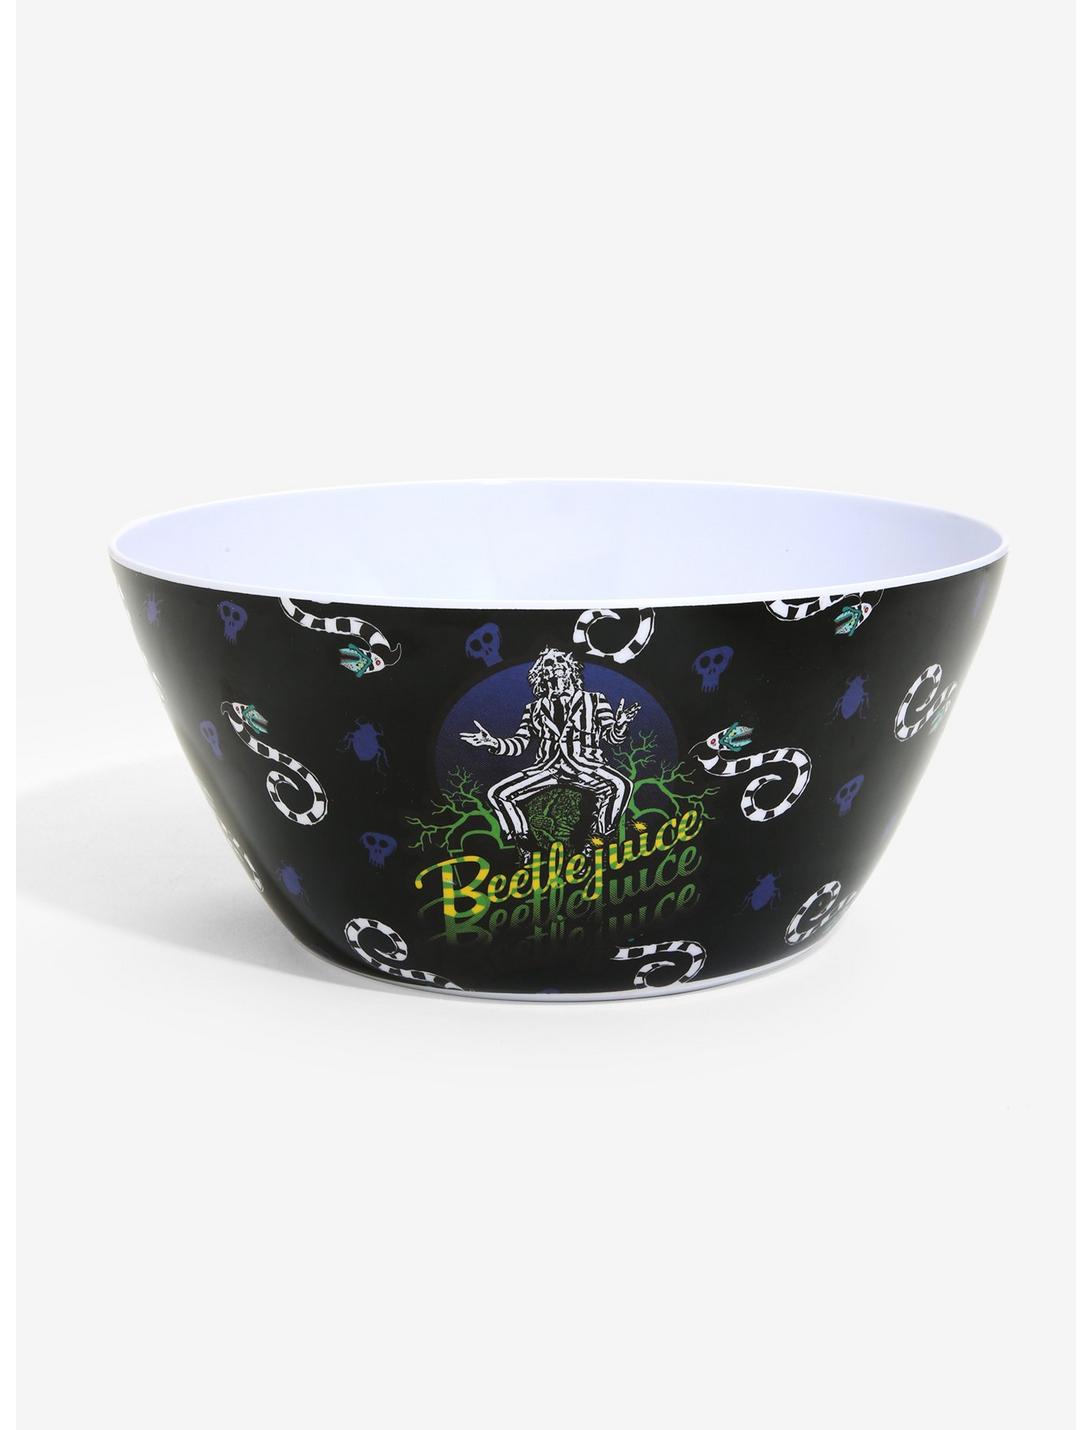 Beetlejuice Candy Bowl Holder Rubie's Costume Co 68535 